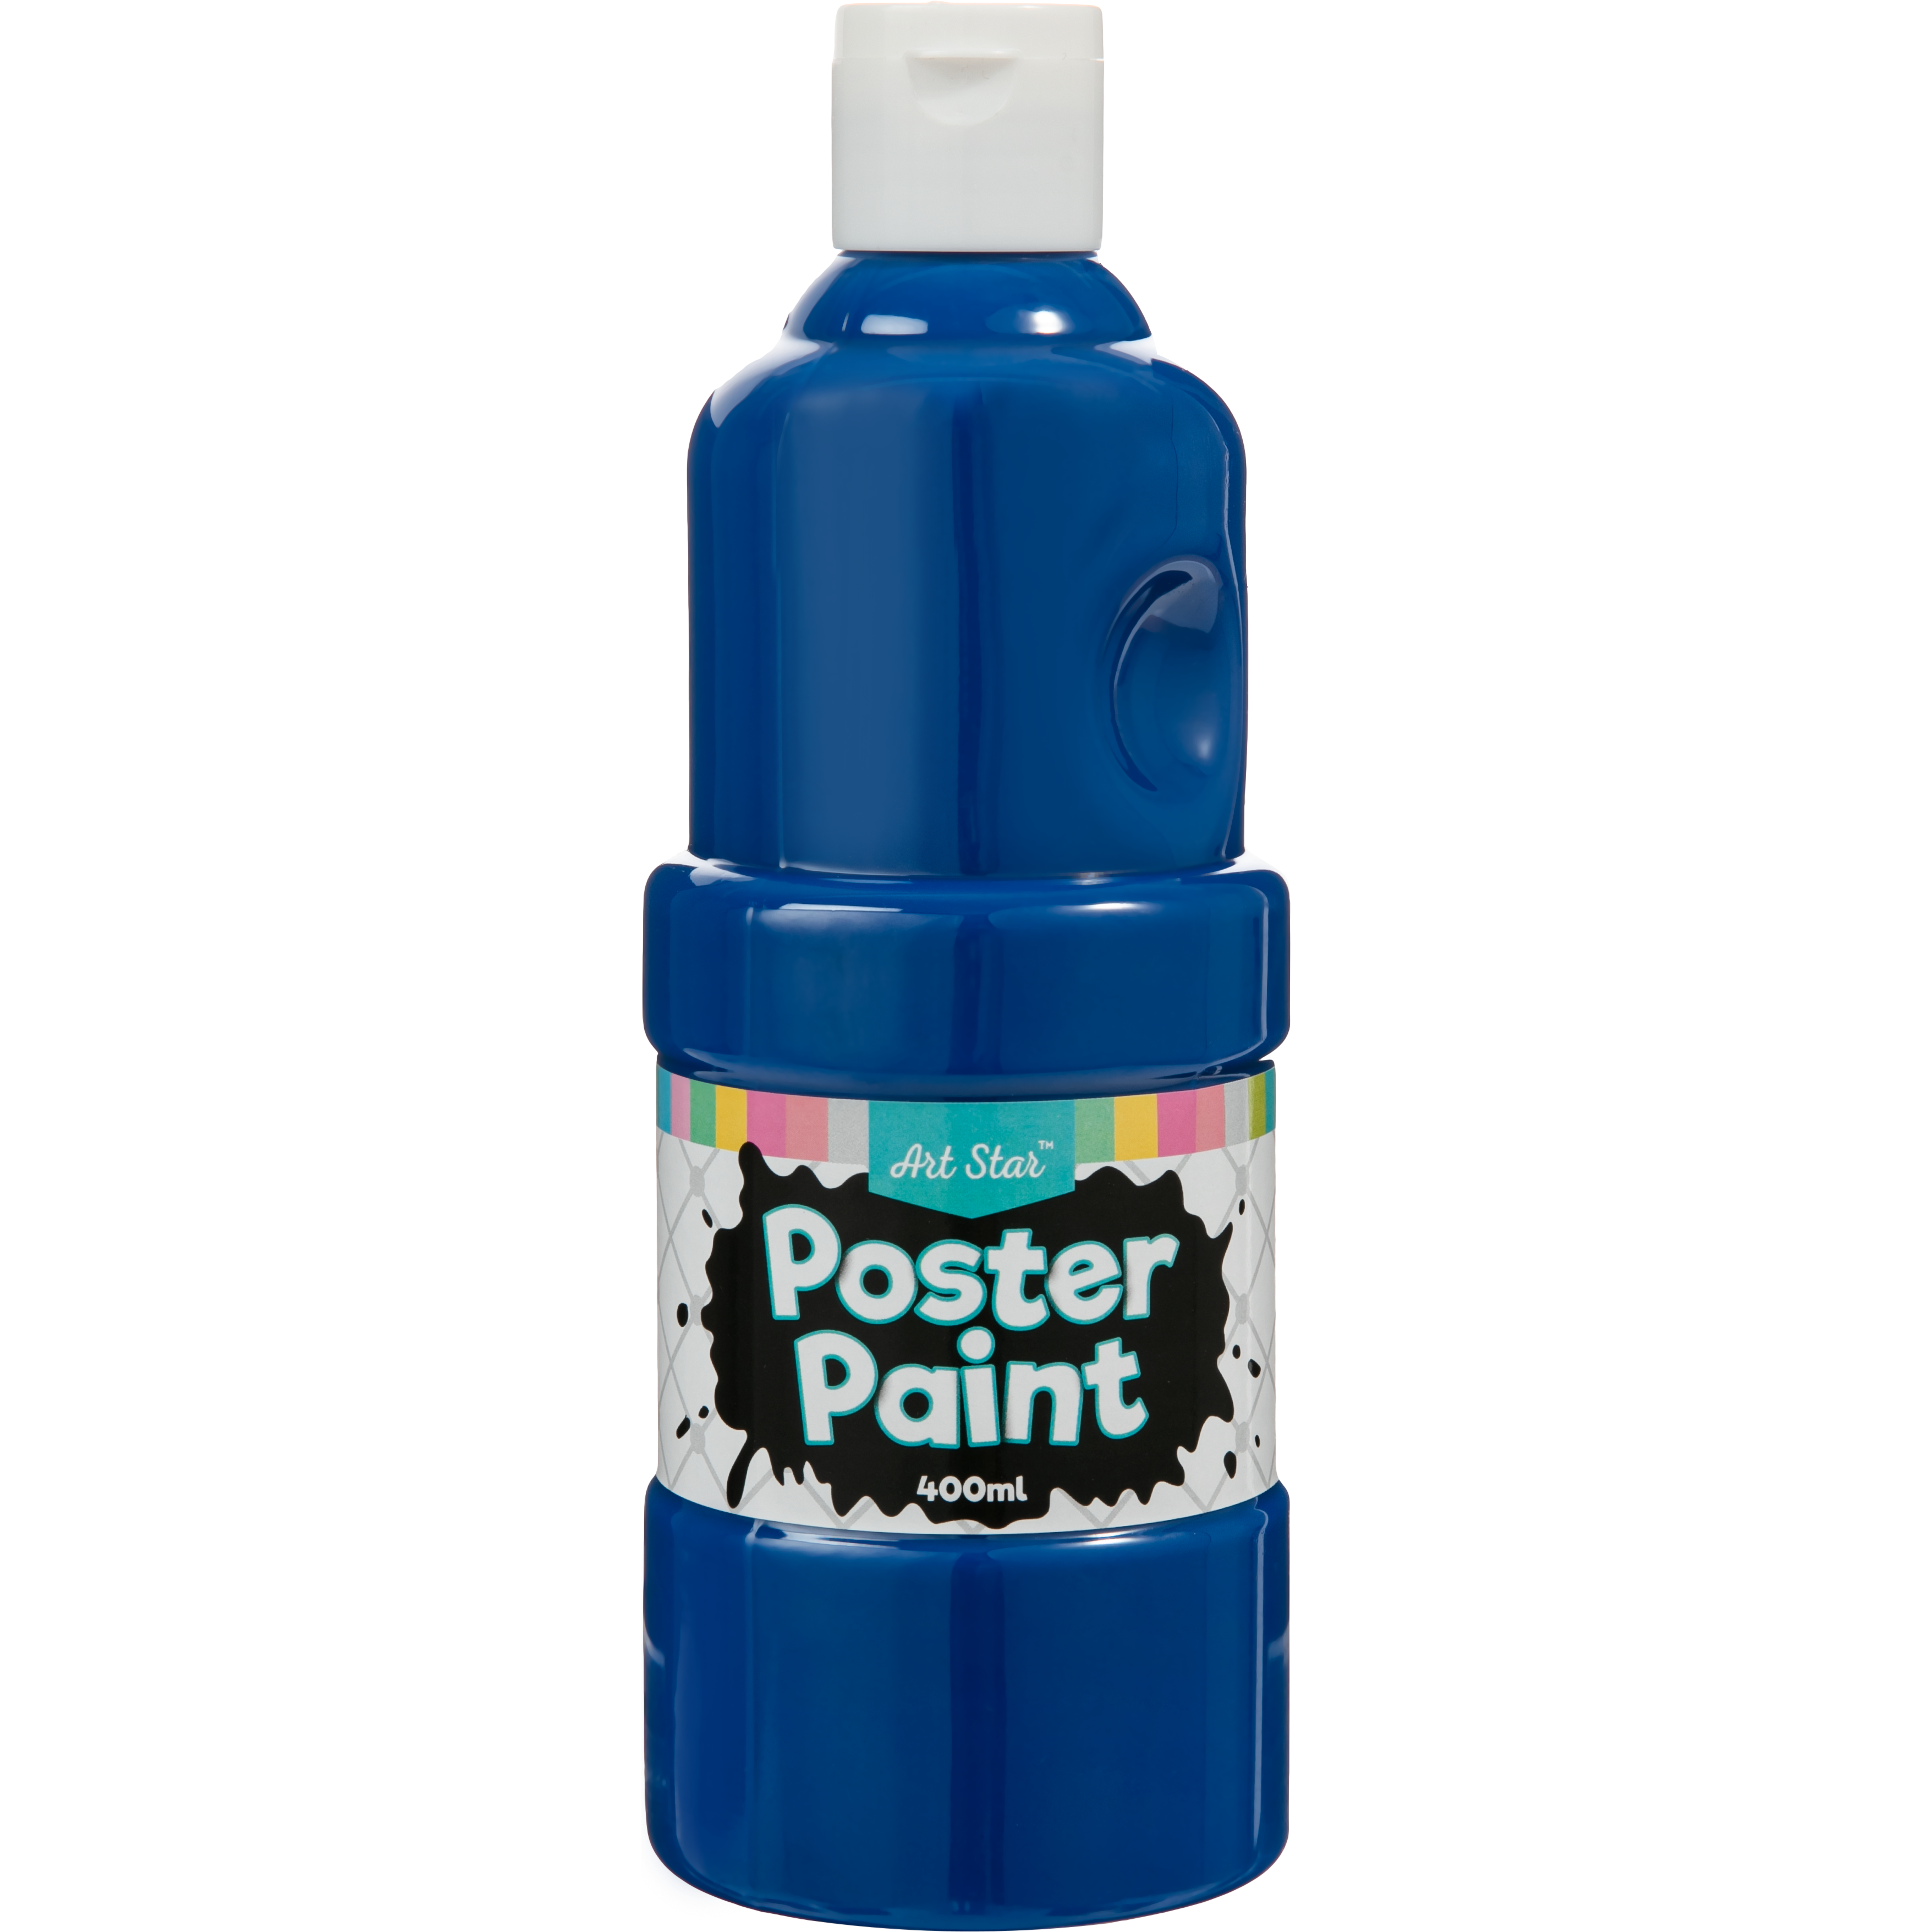 Have a look through our Art Star Poster Paint Blue 400ml FPL Art Star  Poster Paint Blue 400ml FPL selection for less